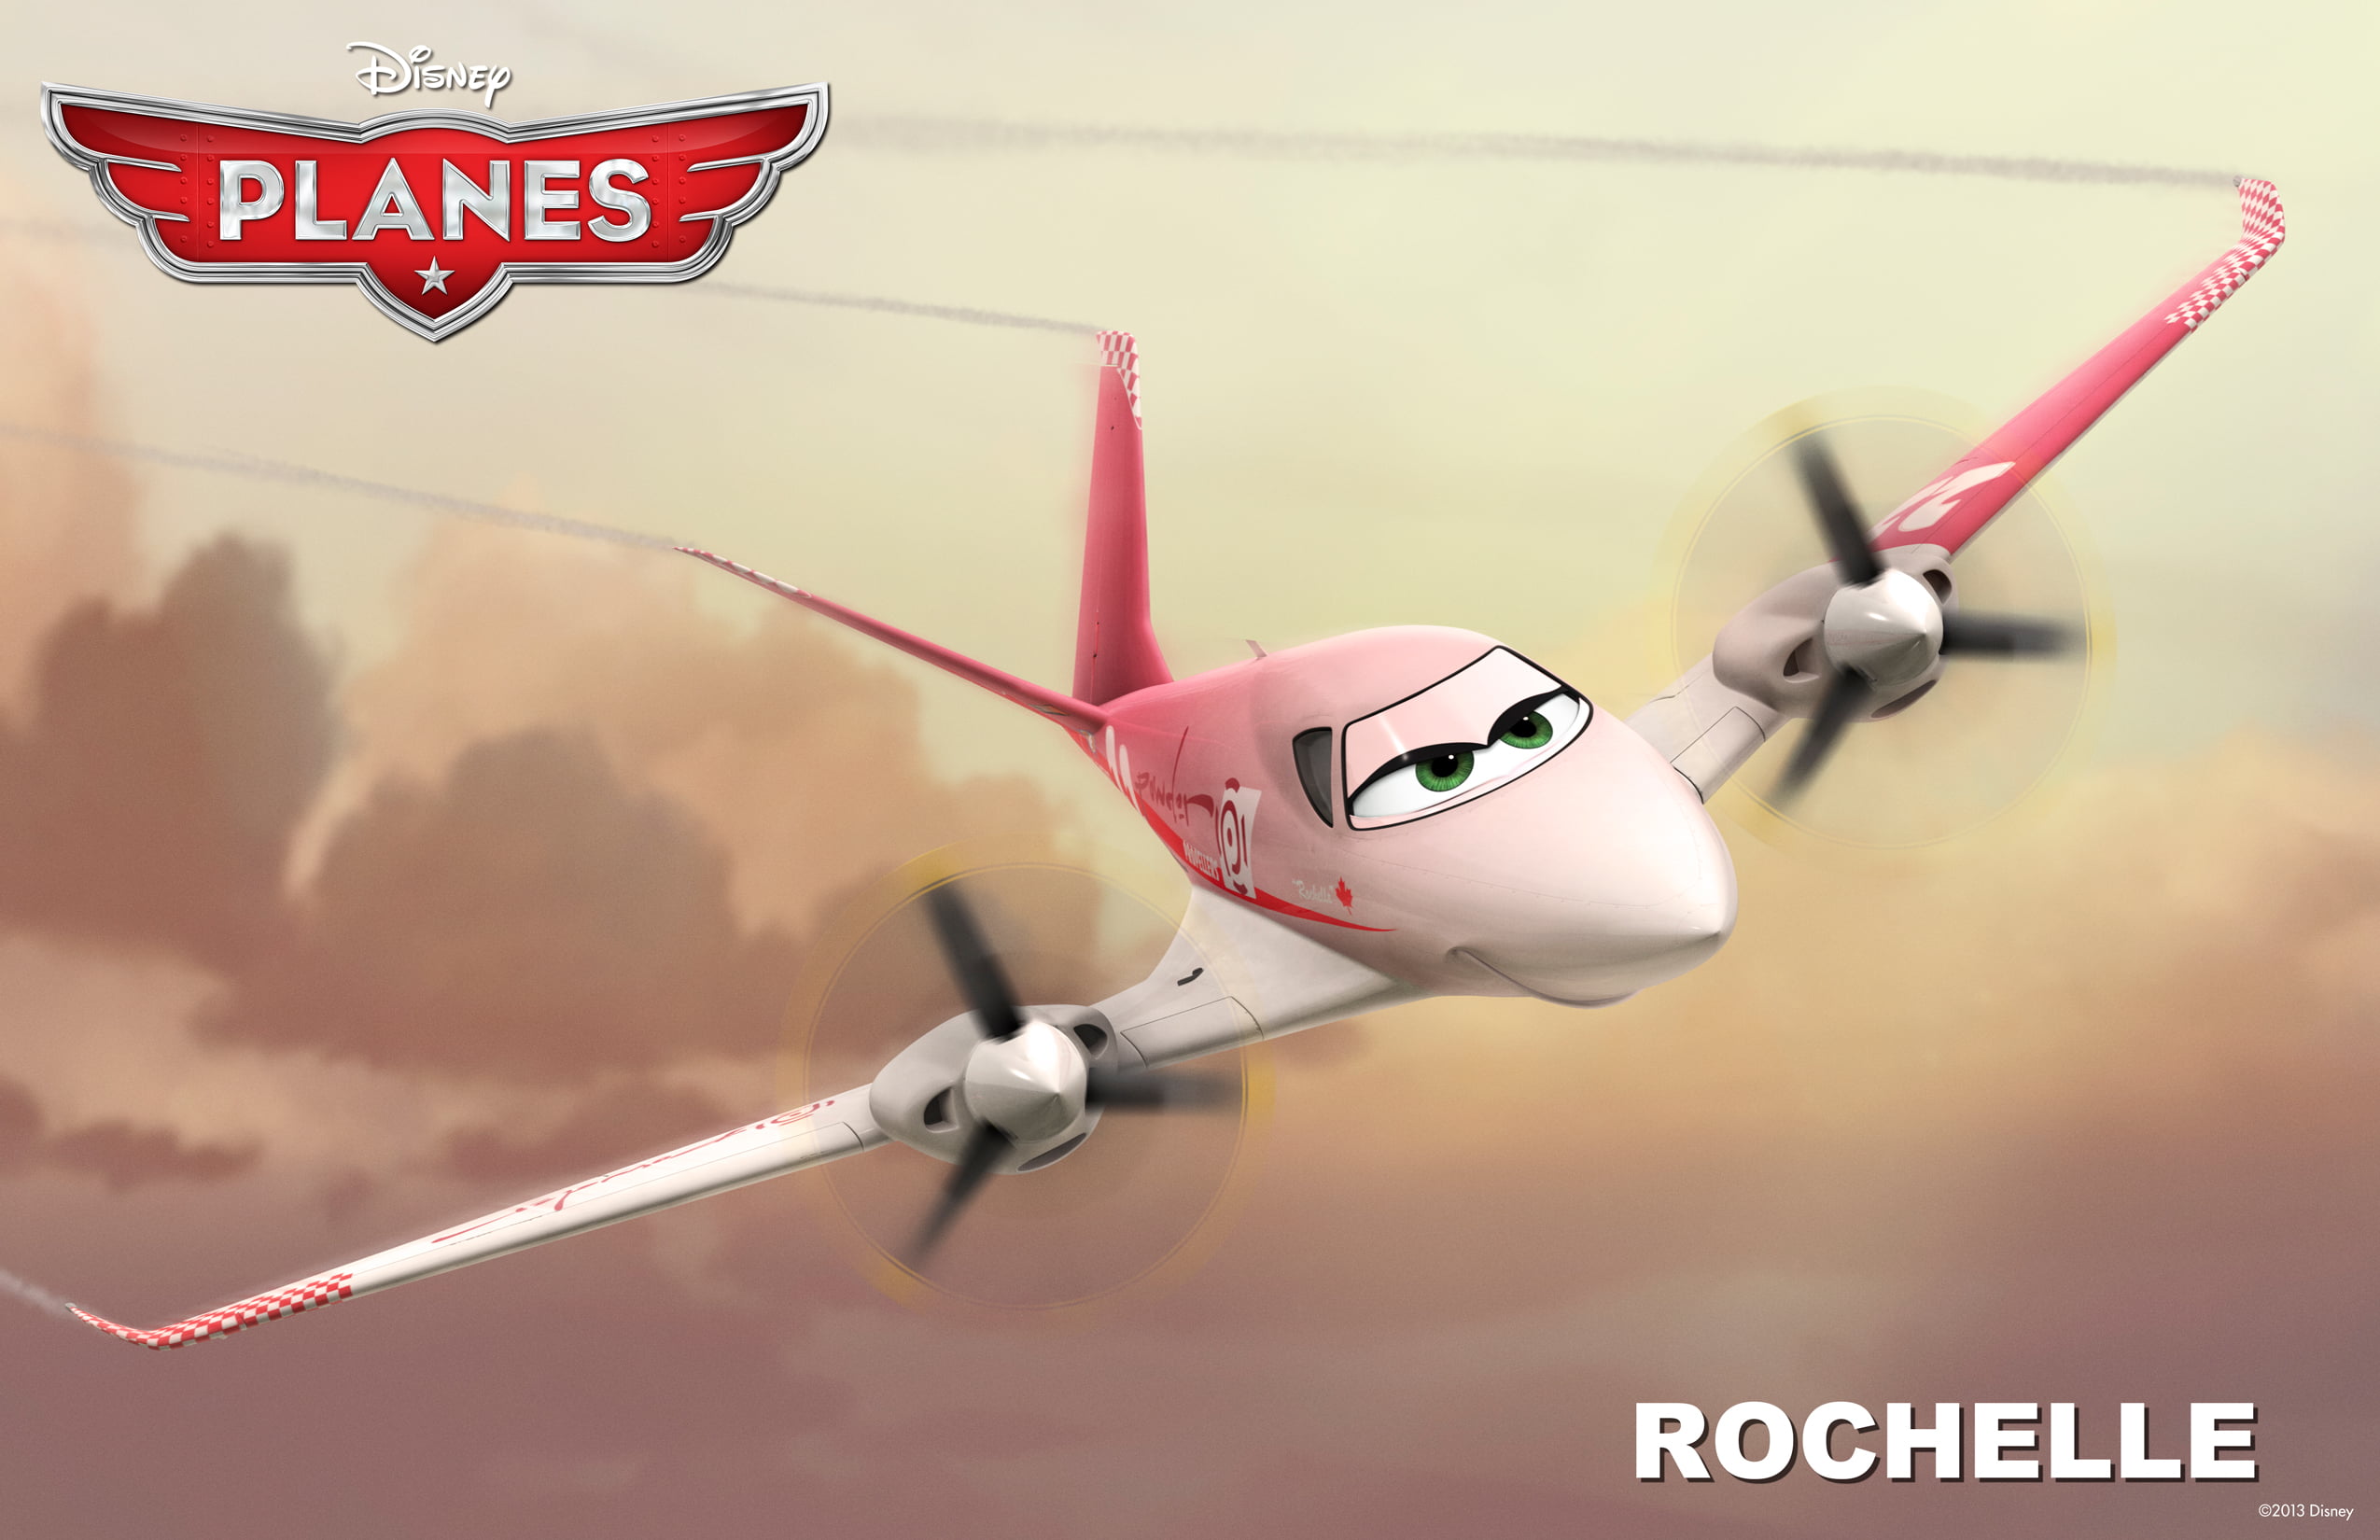 Planes 2013, Disney Planes Rochelle wallpaper, Movies, Hollywood Movies